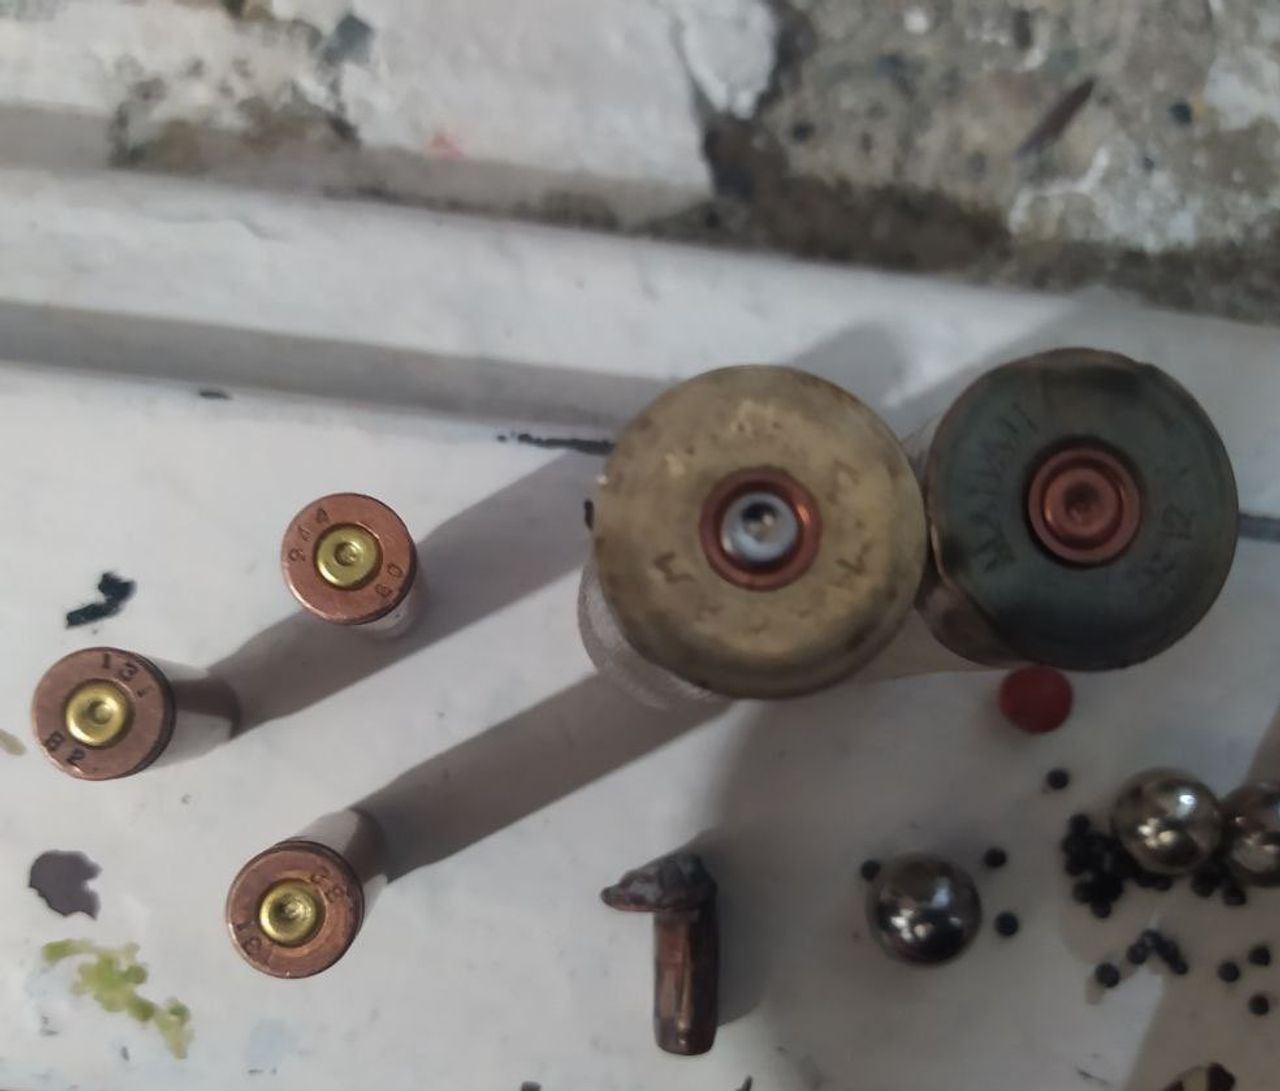 Cartridges with birdshots and buckshots used against protesters by security forces 